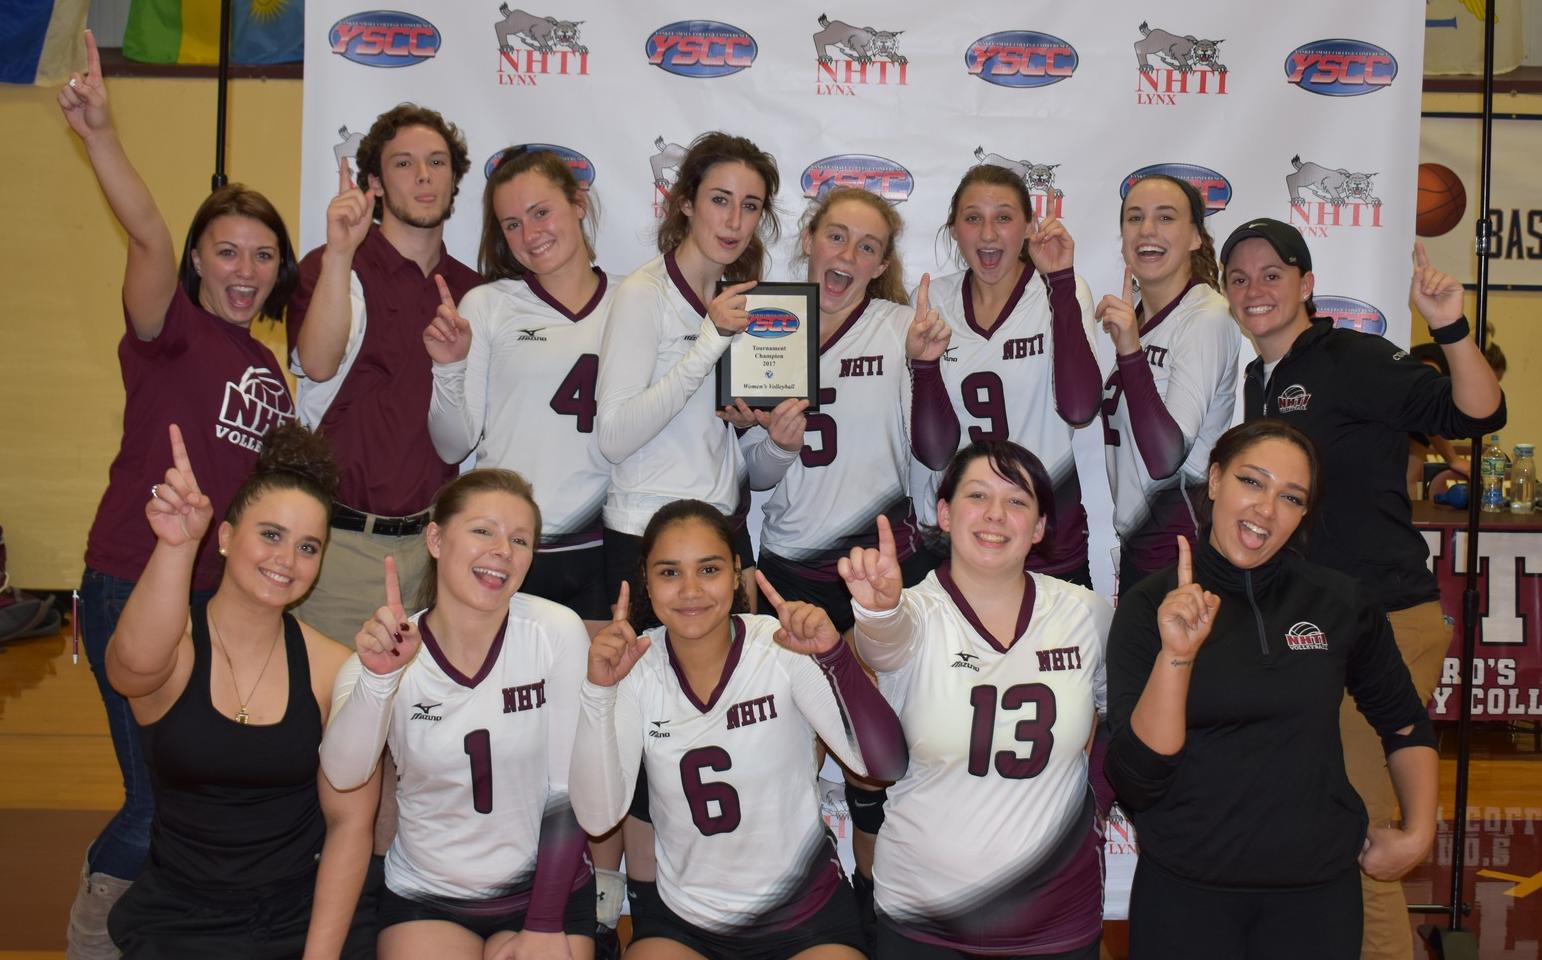 NHTI wins 3rd consecutive YSCC volleyball title